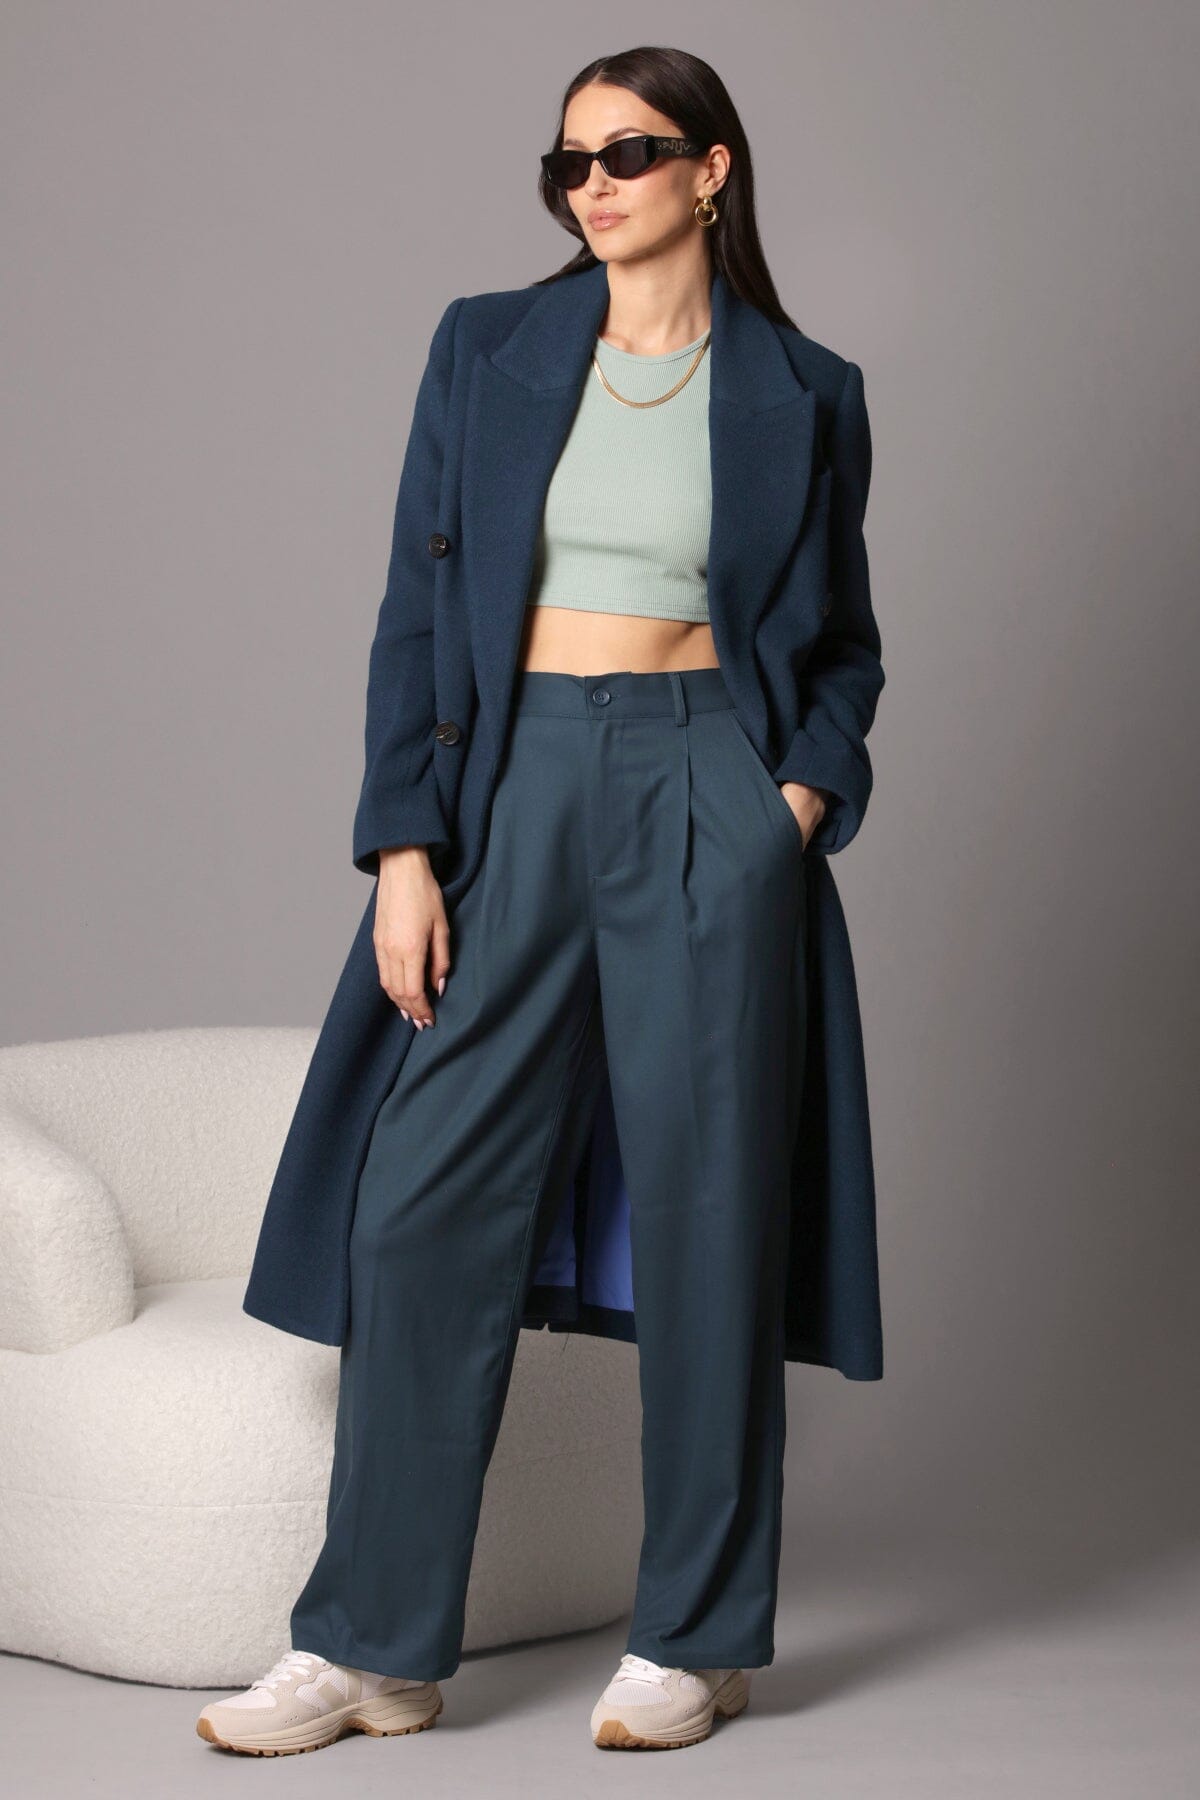 Deep teal wool blend double breasted tailored coat jacket - women's figure flattering day to night long coats outerwear